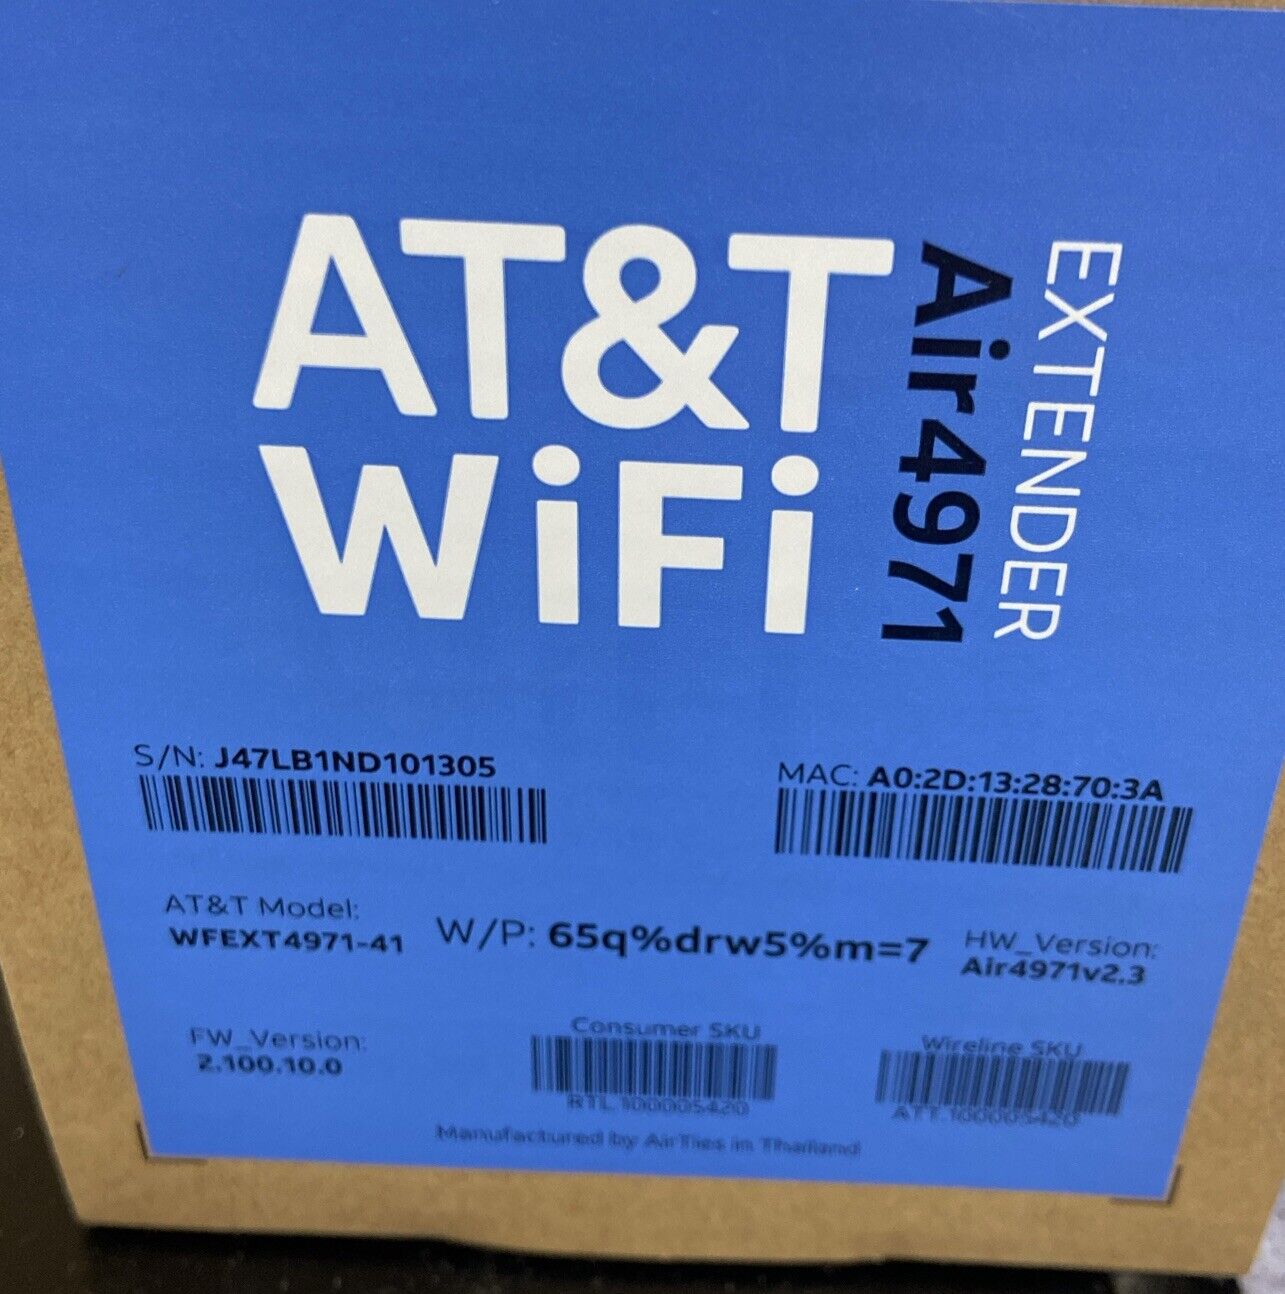 AT&T Air 4971 Tri-Band Wi-Fi 6 Smart Extender (NEW IN BOX) WFEXT4971-41